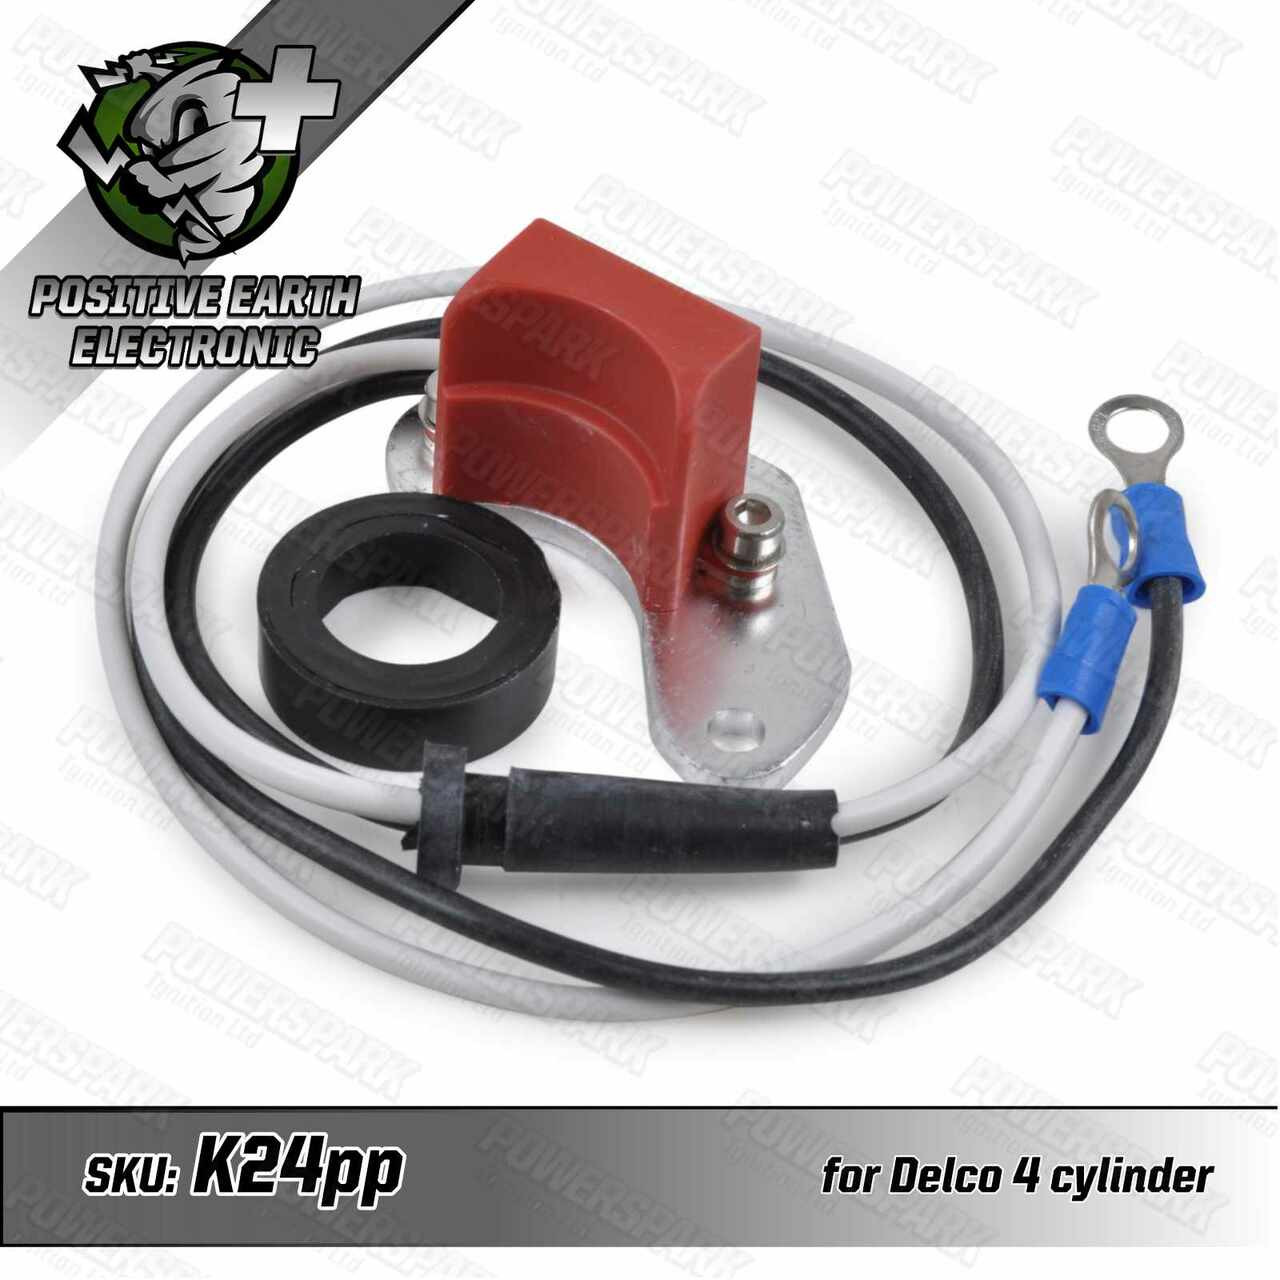 Powerspark Powerspark Electronic Ignition Kit for Delco 4 Cyl Distributor Positive Earth K24pp